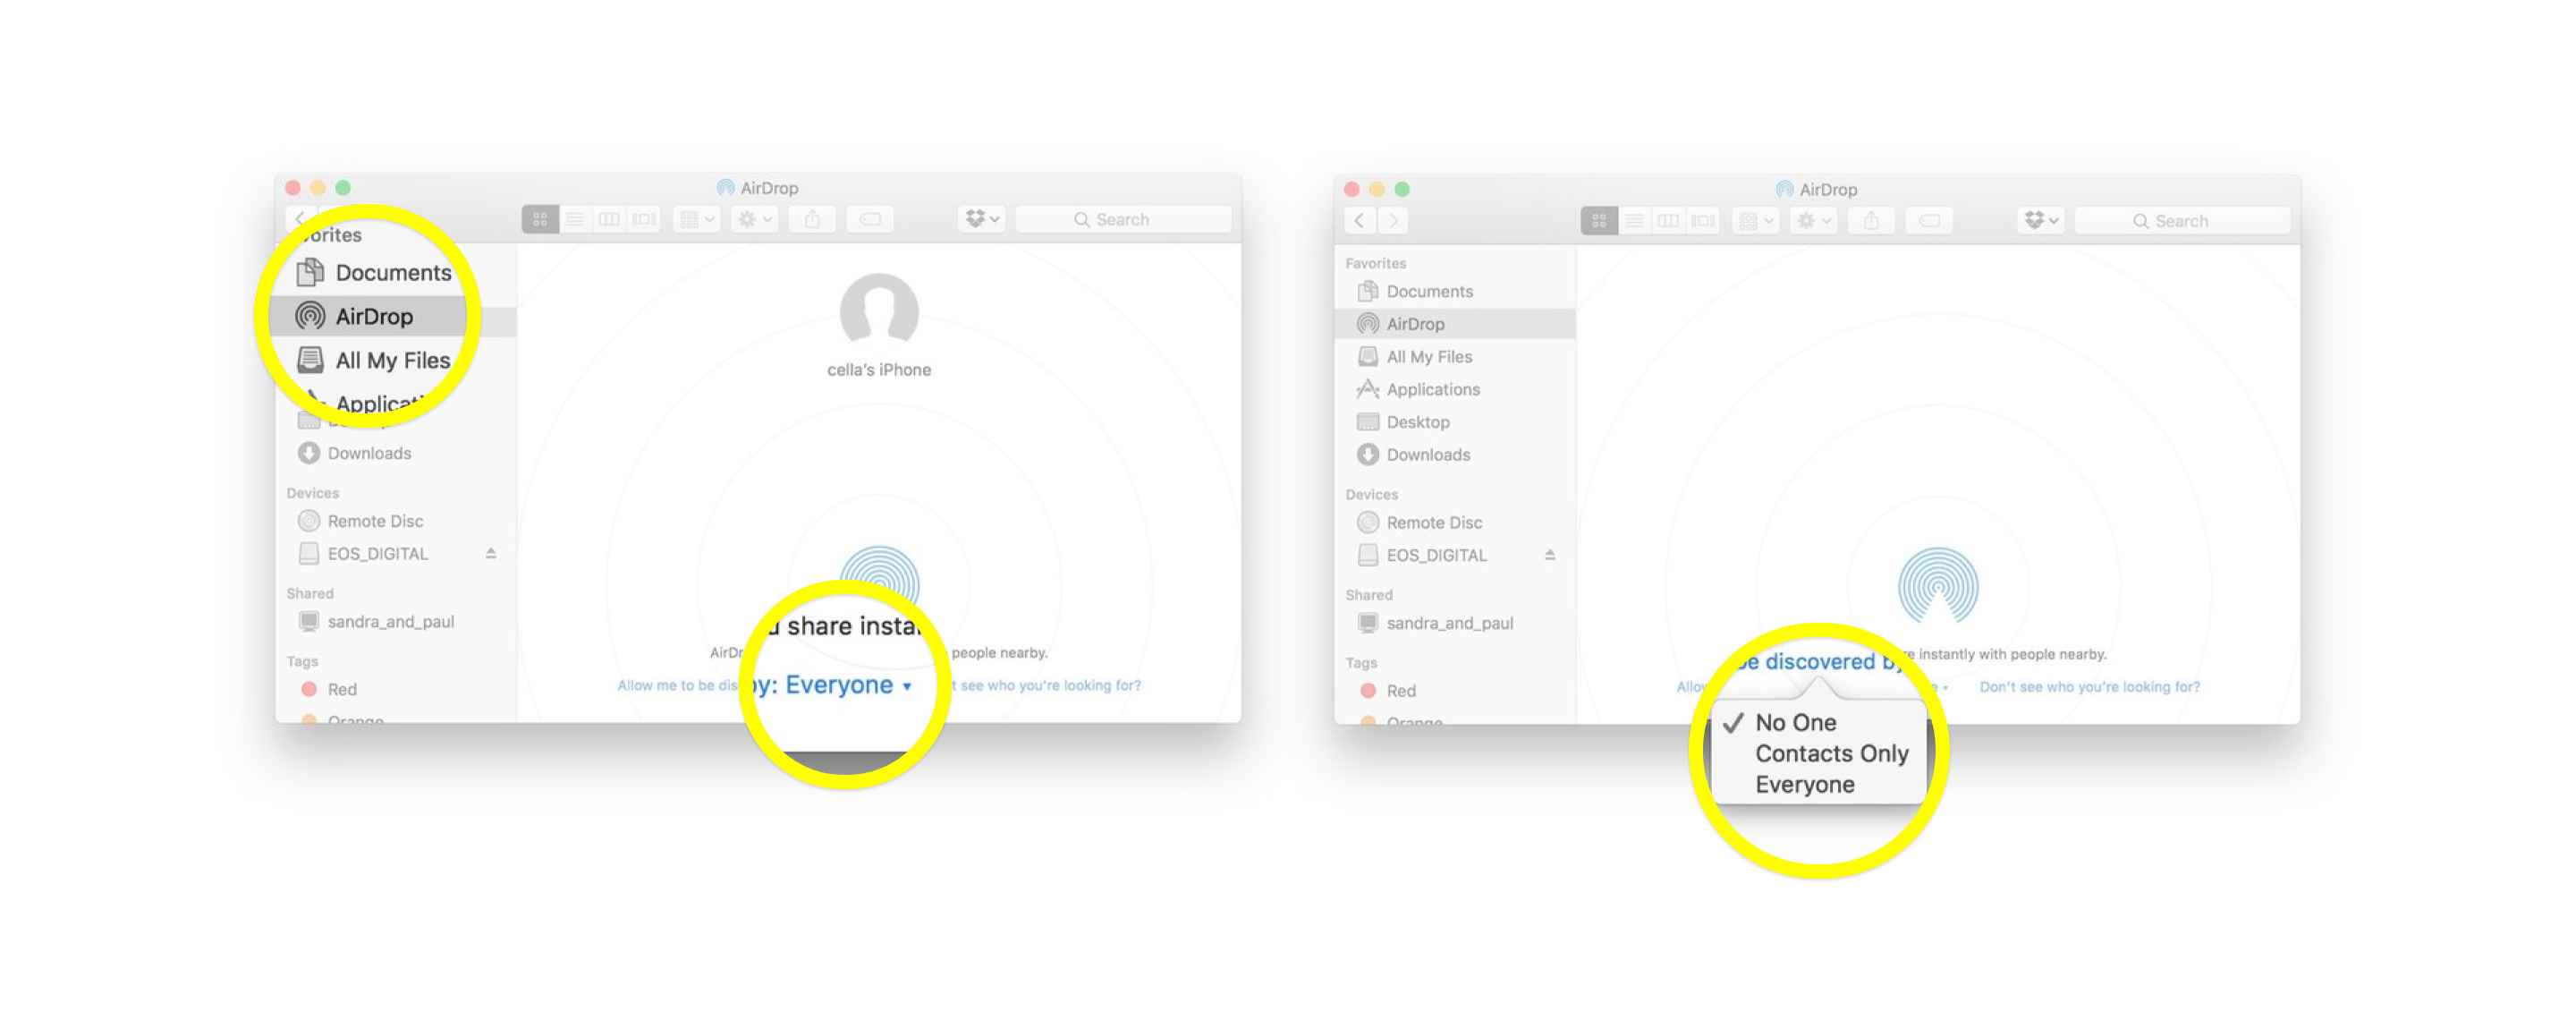 How to Turn on AirDrop on Mac, iPhone, or iPad